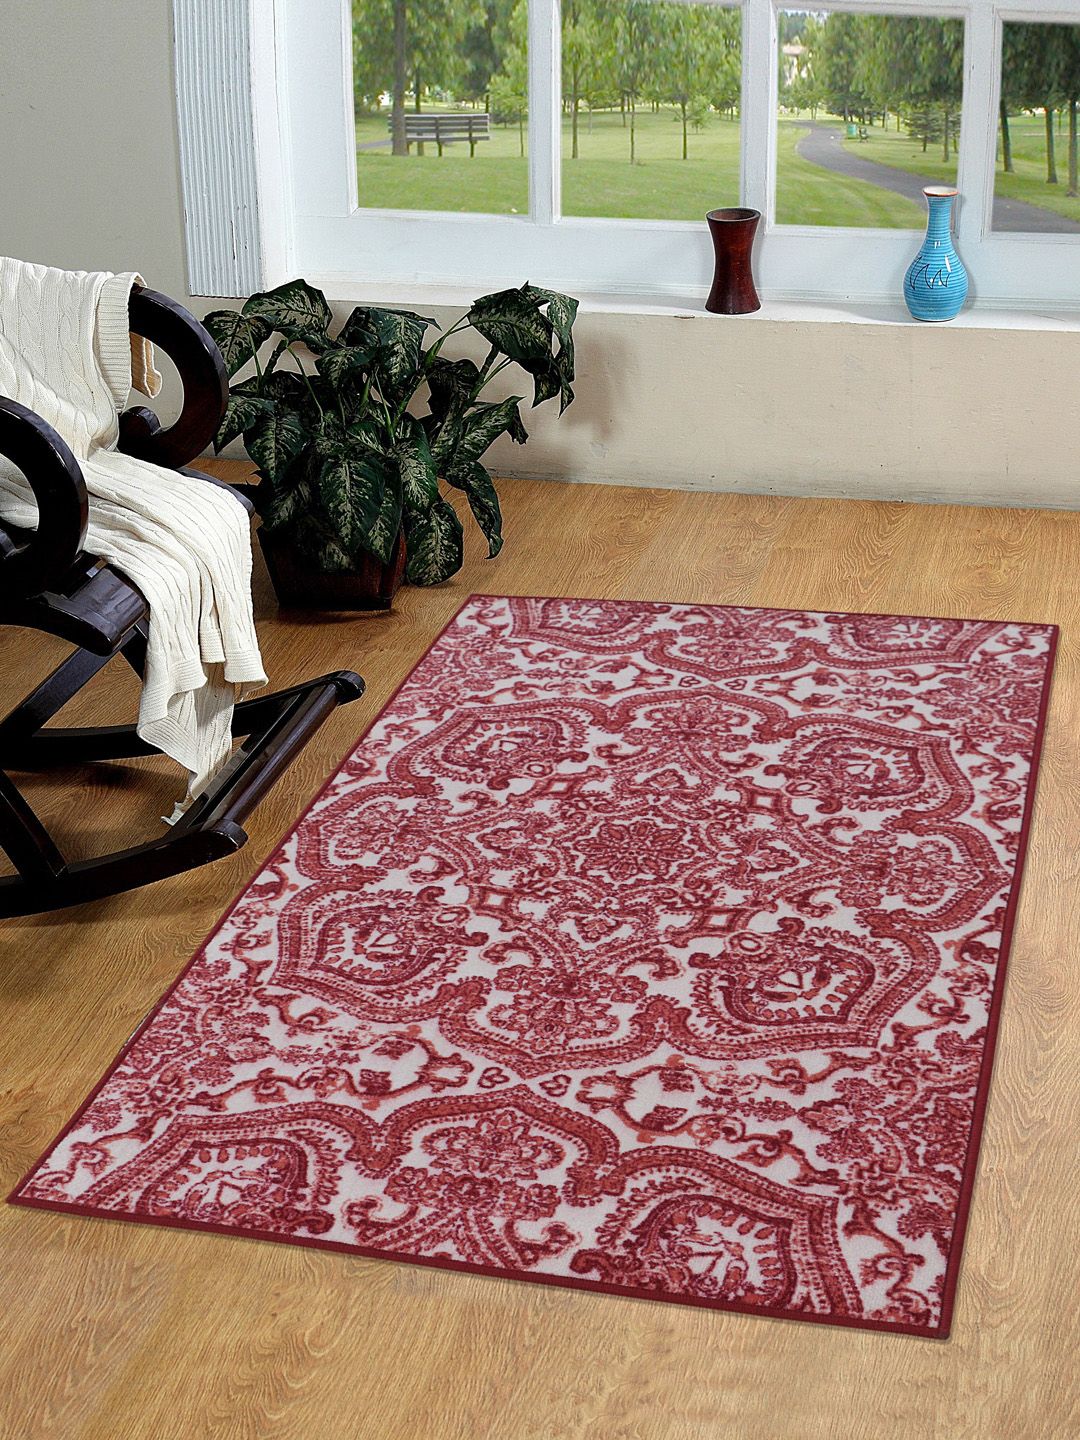 RUGSMITH White & Red Patterned Anti-Skid Carpet Price in India